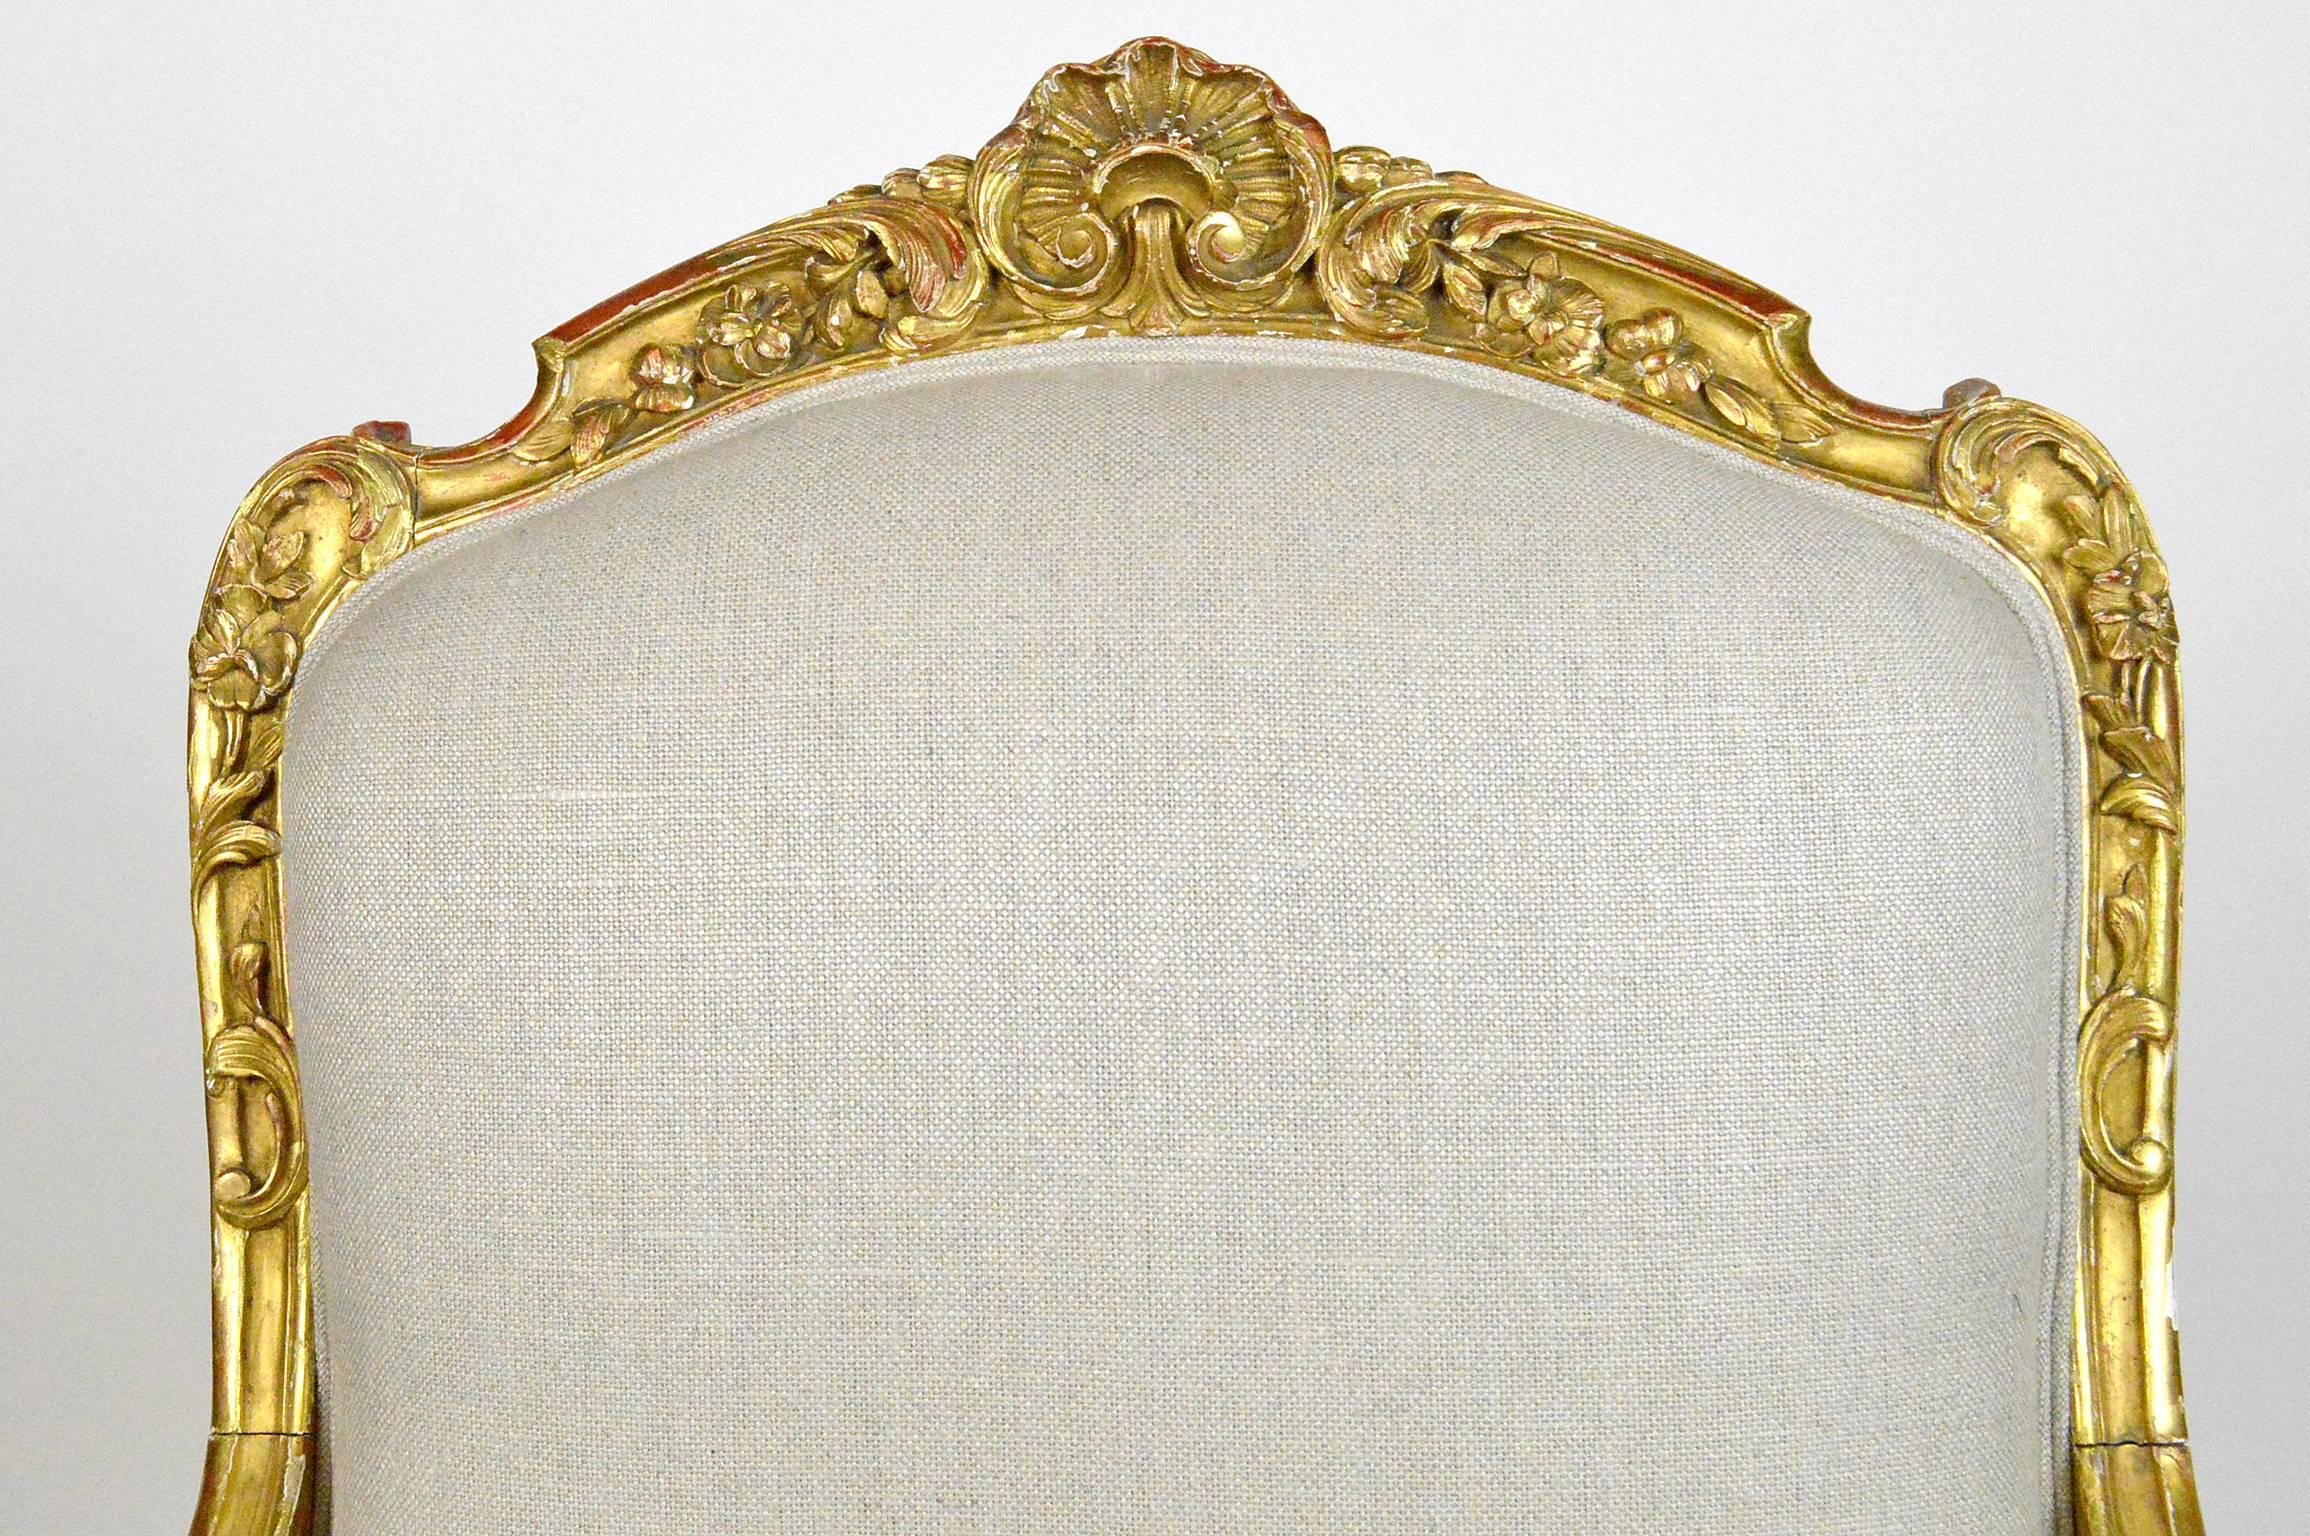 French Louis XV Style Giltwood Armchair